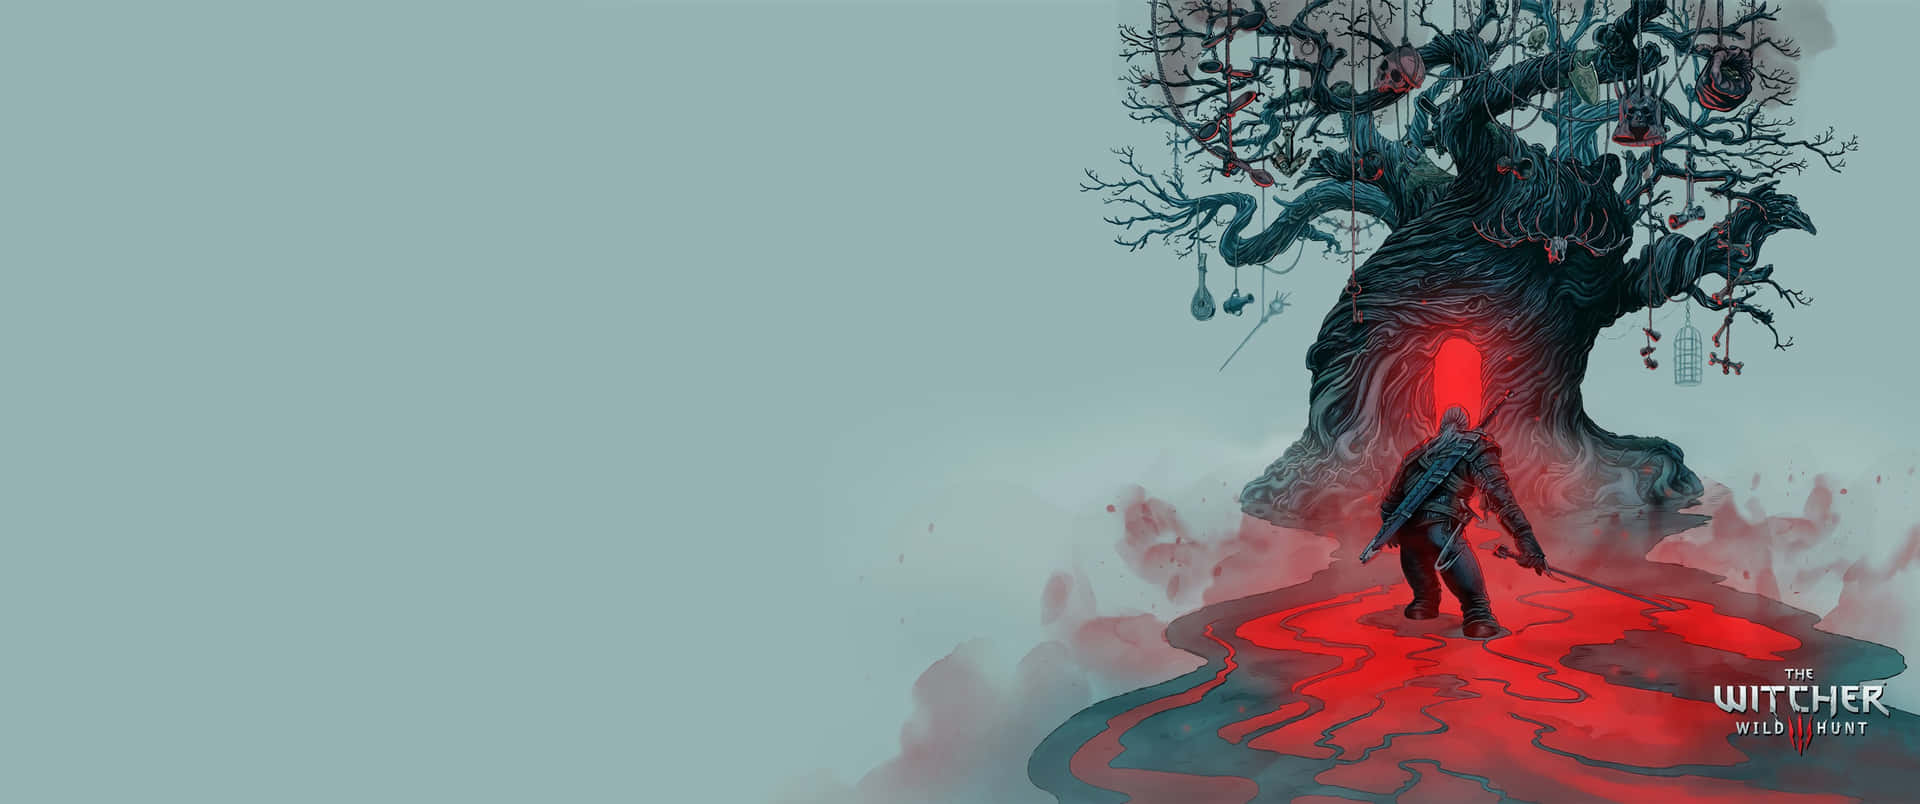 3440x1440 Witcher Glowing Tree Entrance Wallpaper